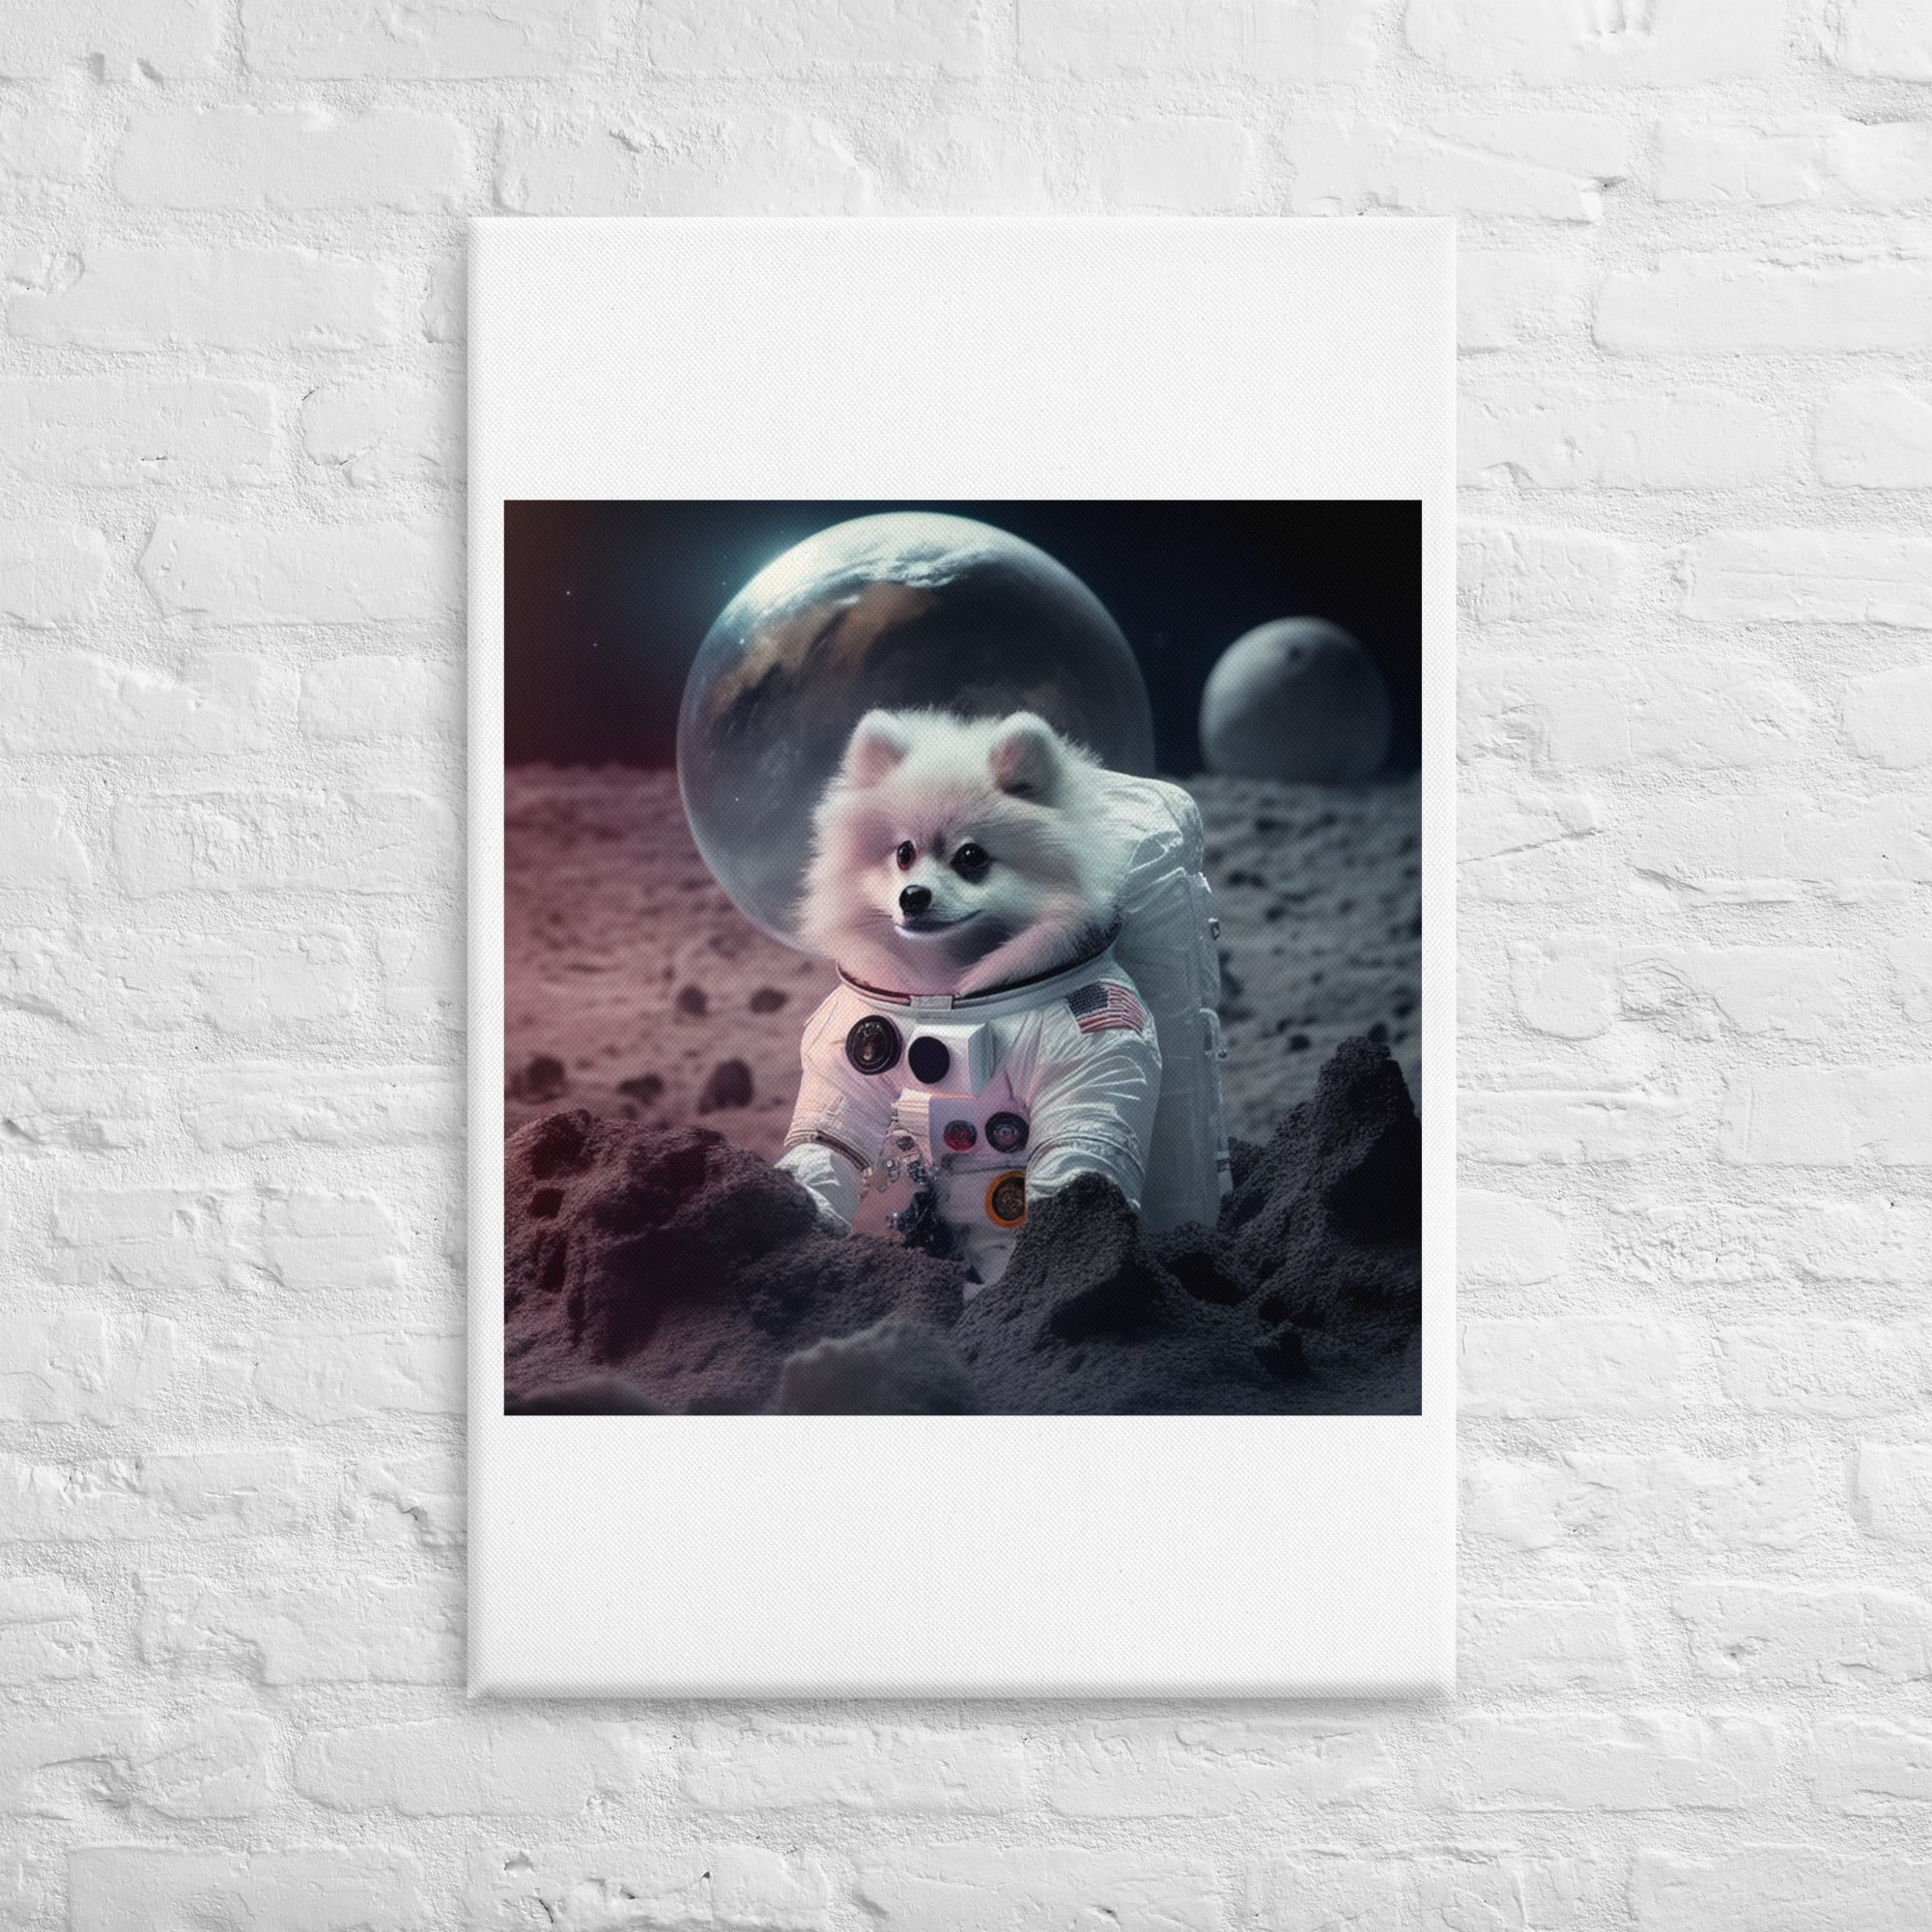 CANVAS PRINT 1:11 Marshmello ( @cryptopup, First Dog Character To Return To The Moon Since 1969) Bonus 1:11 NFT ( Mint Date April 8th, 2023)